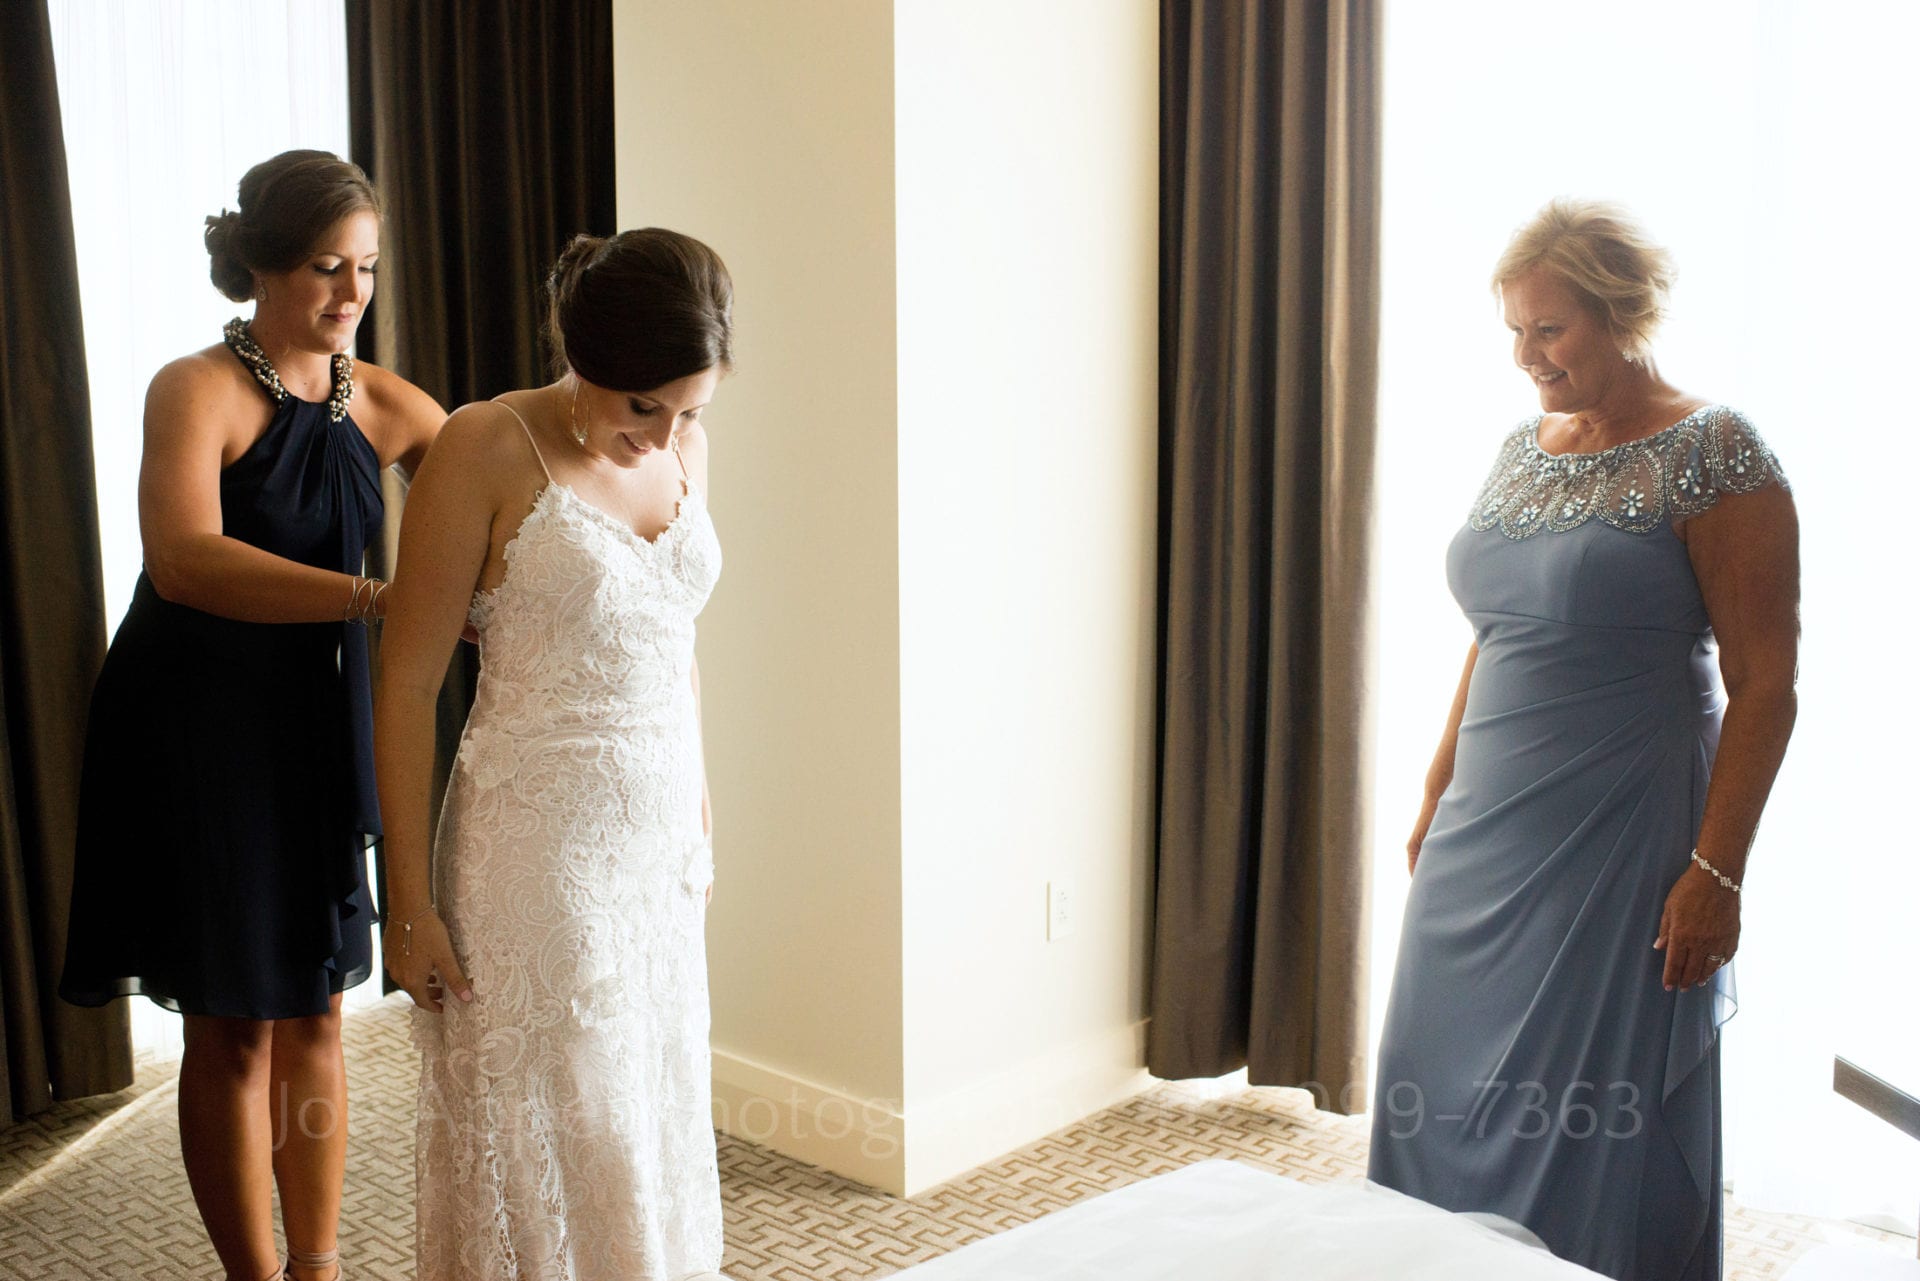 A bride is helped into her dress by a bridesmaid wearing a blue dress as their mother stands watching while wearing a light blue dress Fairmont Hotel Pittsburgh Weddings.